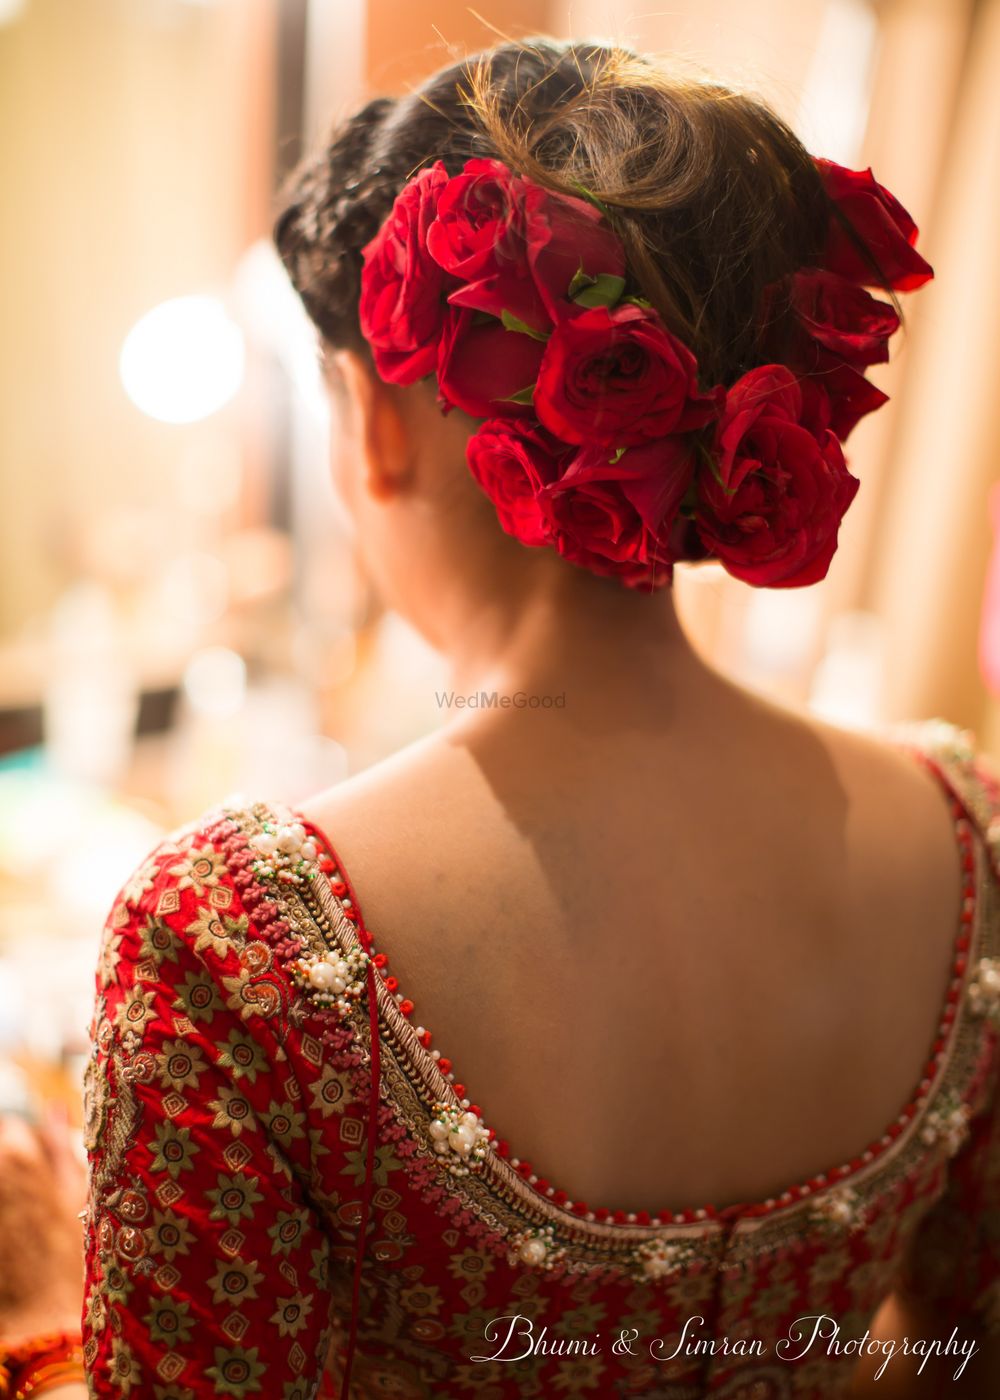 Photo of A bride getting her hair done with roses on wedding day